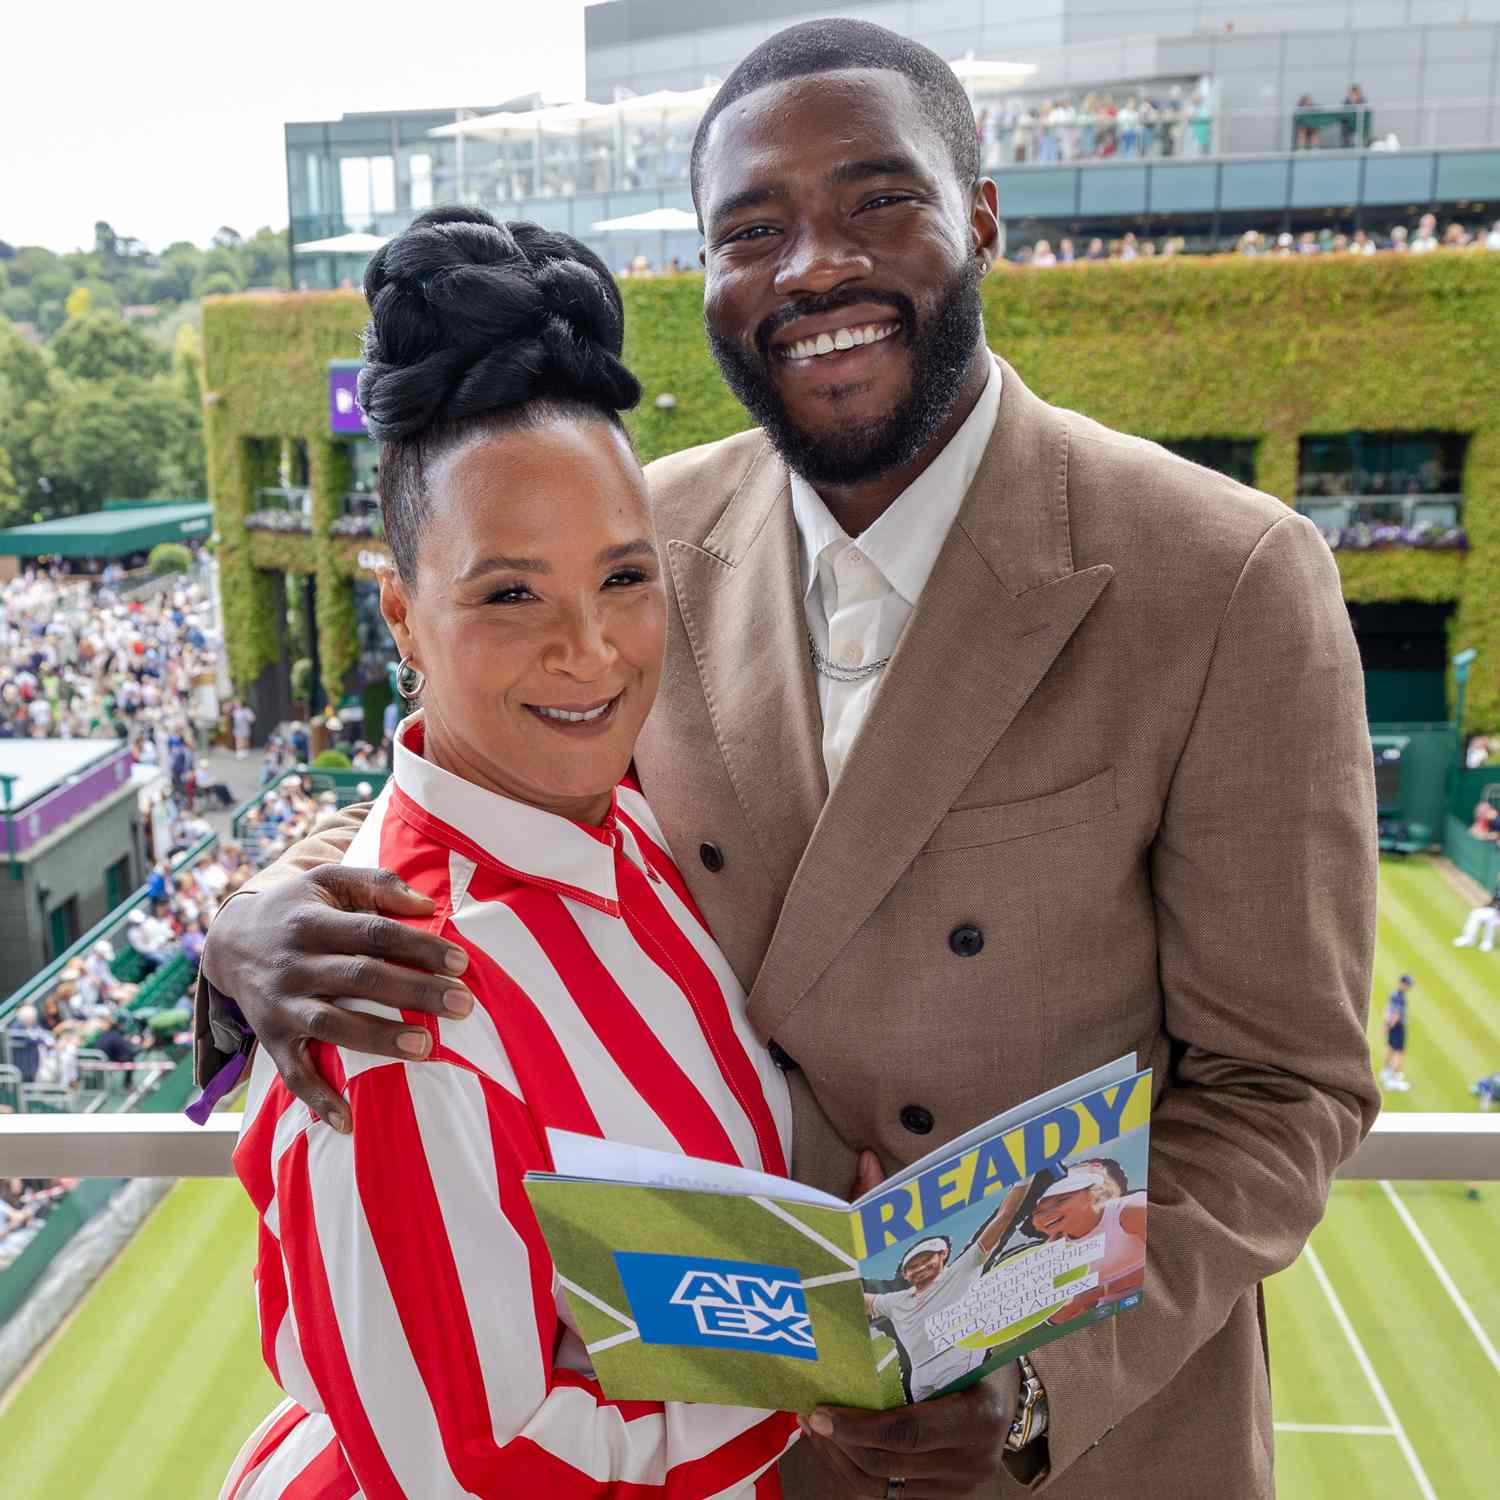 Golda Rosheuvel and Martins Imhangbe are feeling Ready for Wimbledon as guests of American Express on the first day of The 